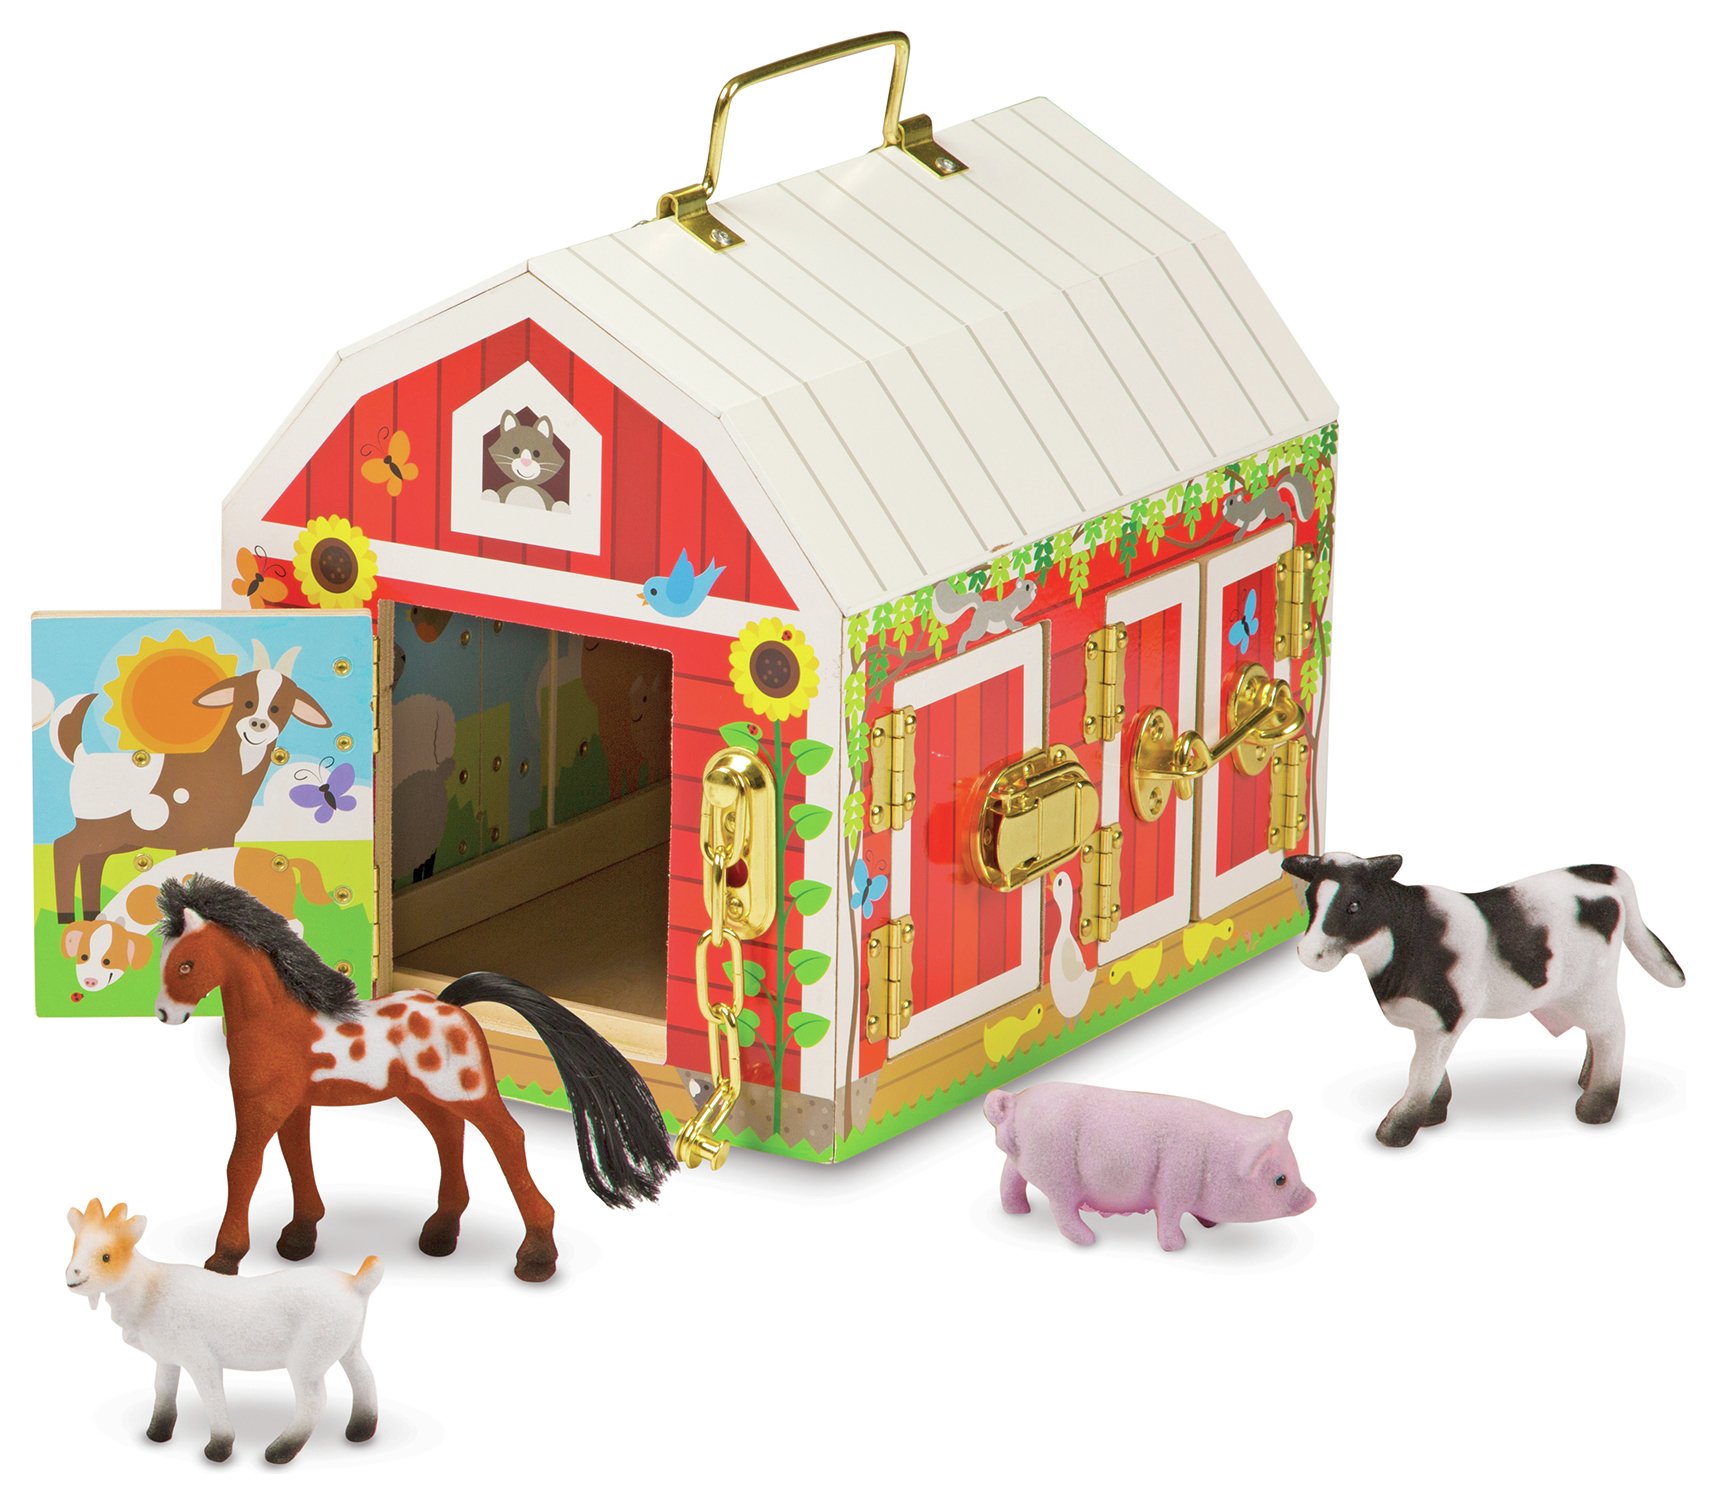 Melissa & doug Wooden Latches Barn Playset review